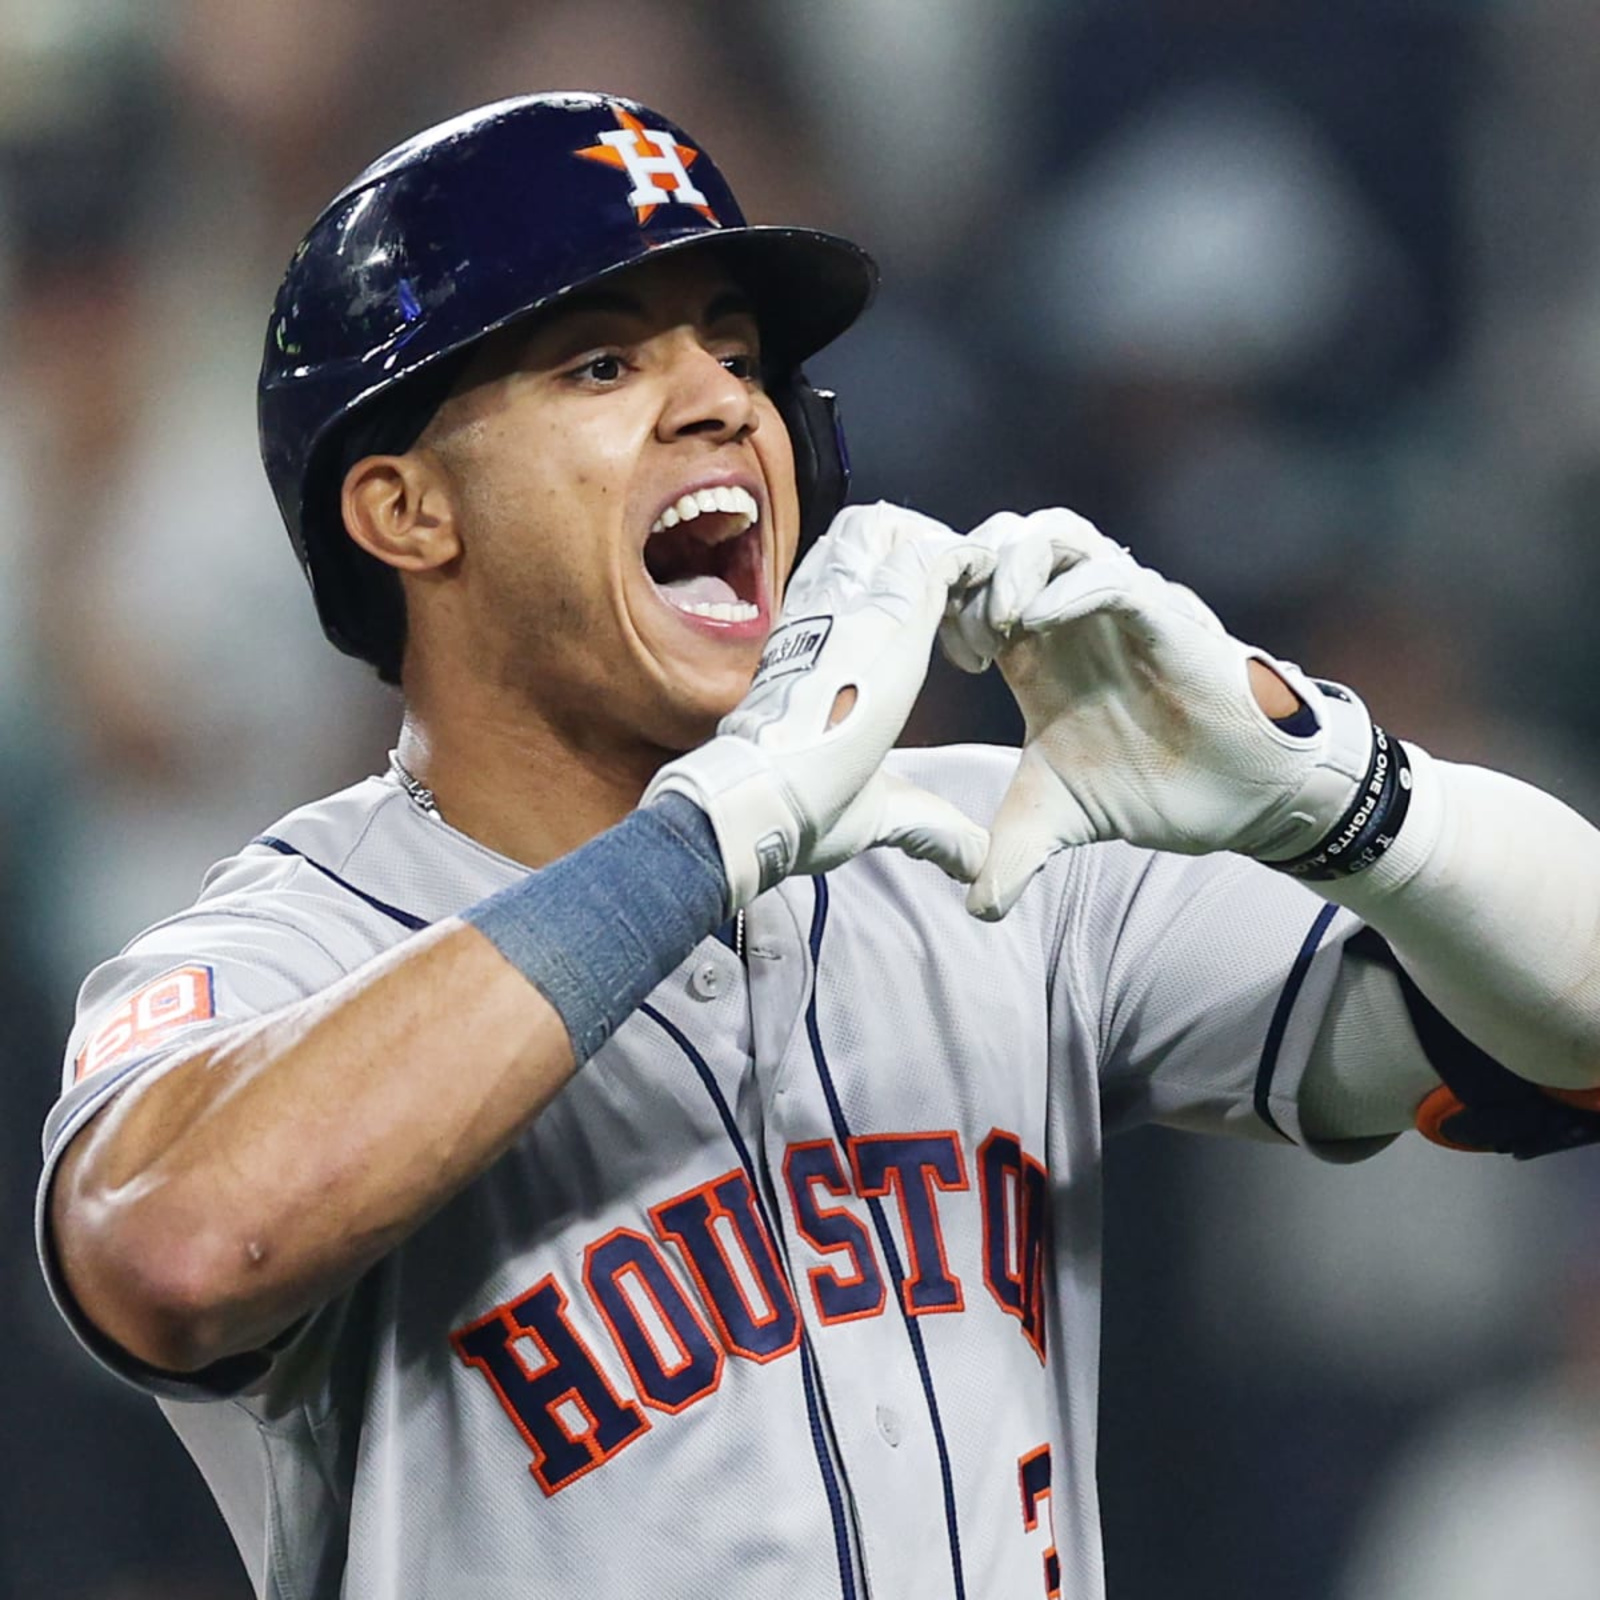 Astros' Jeremy Peña Touted as Clutch After 18th-Inning HR